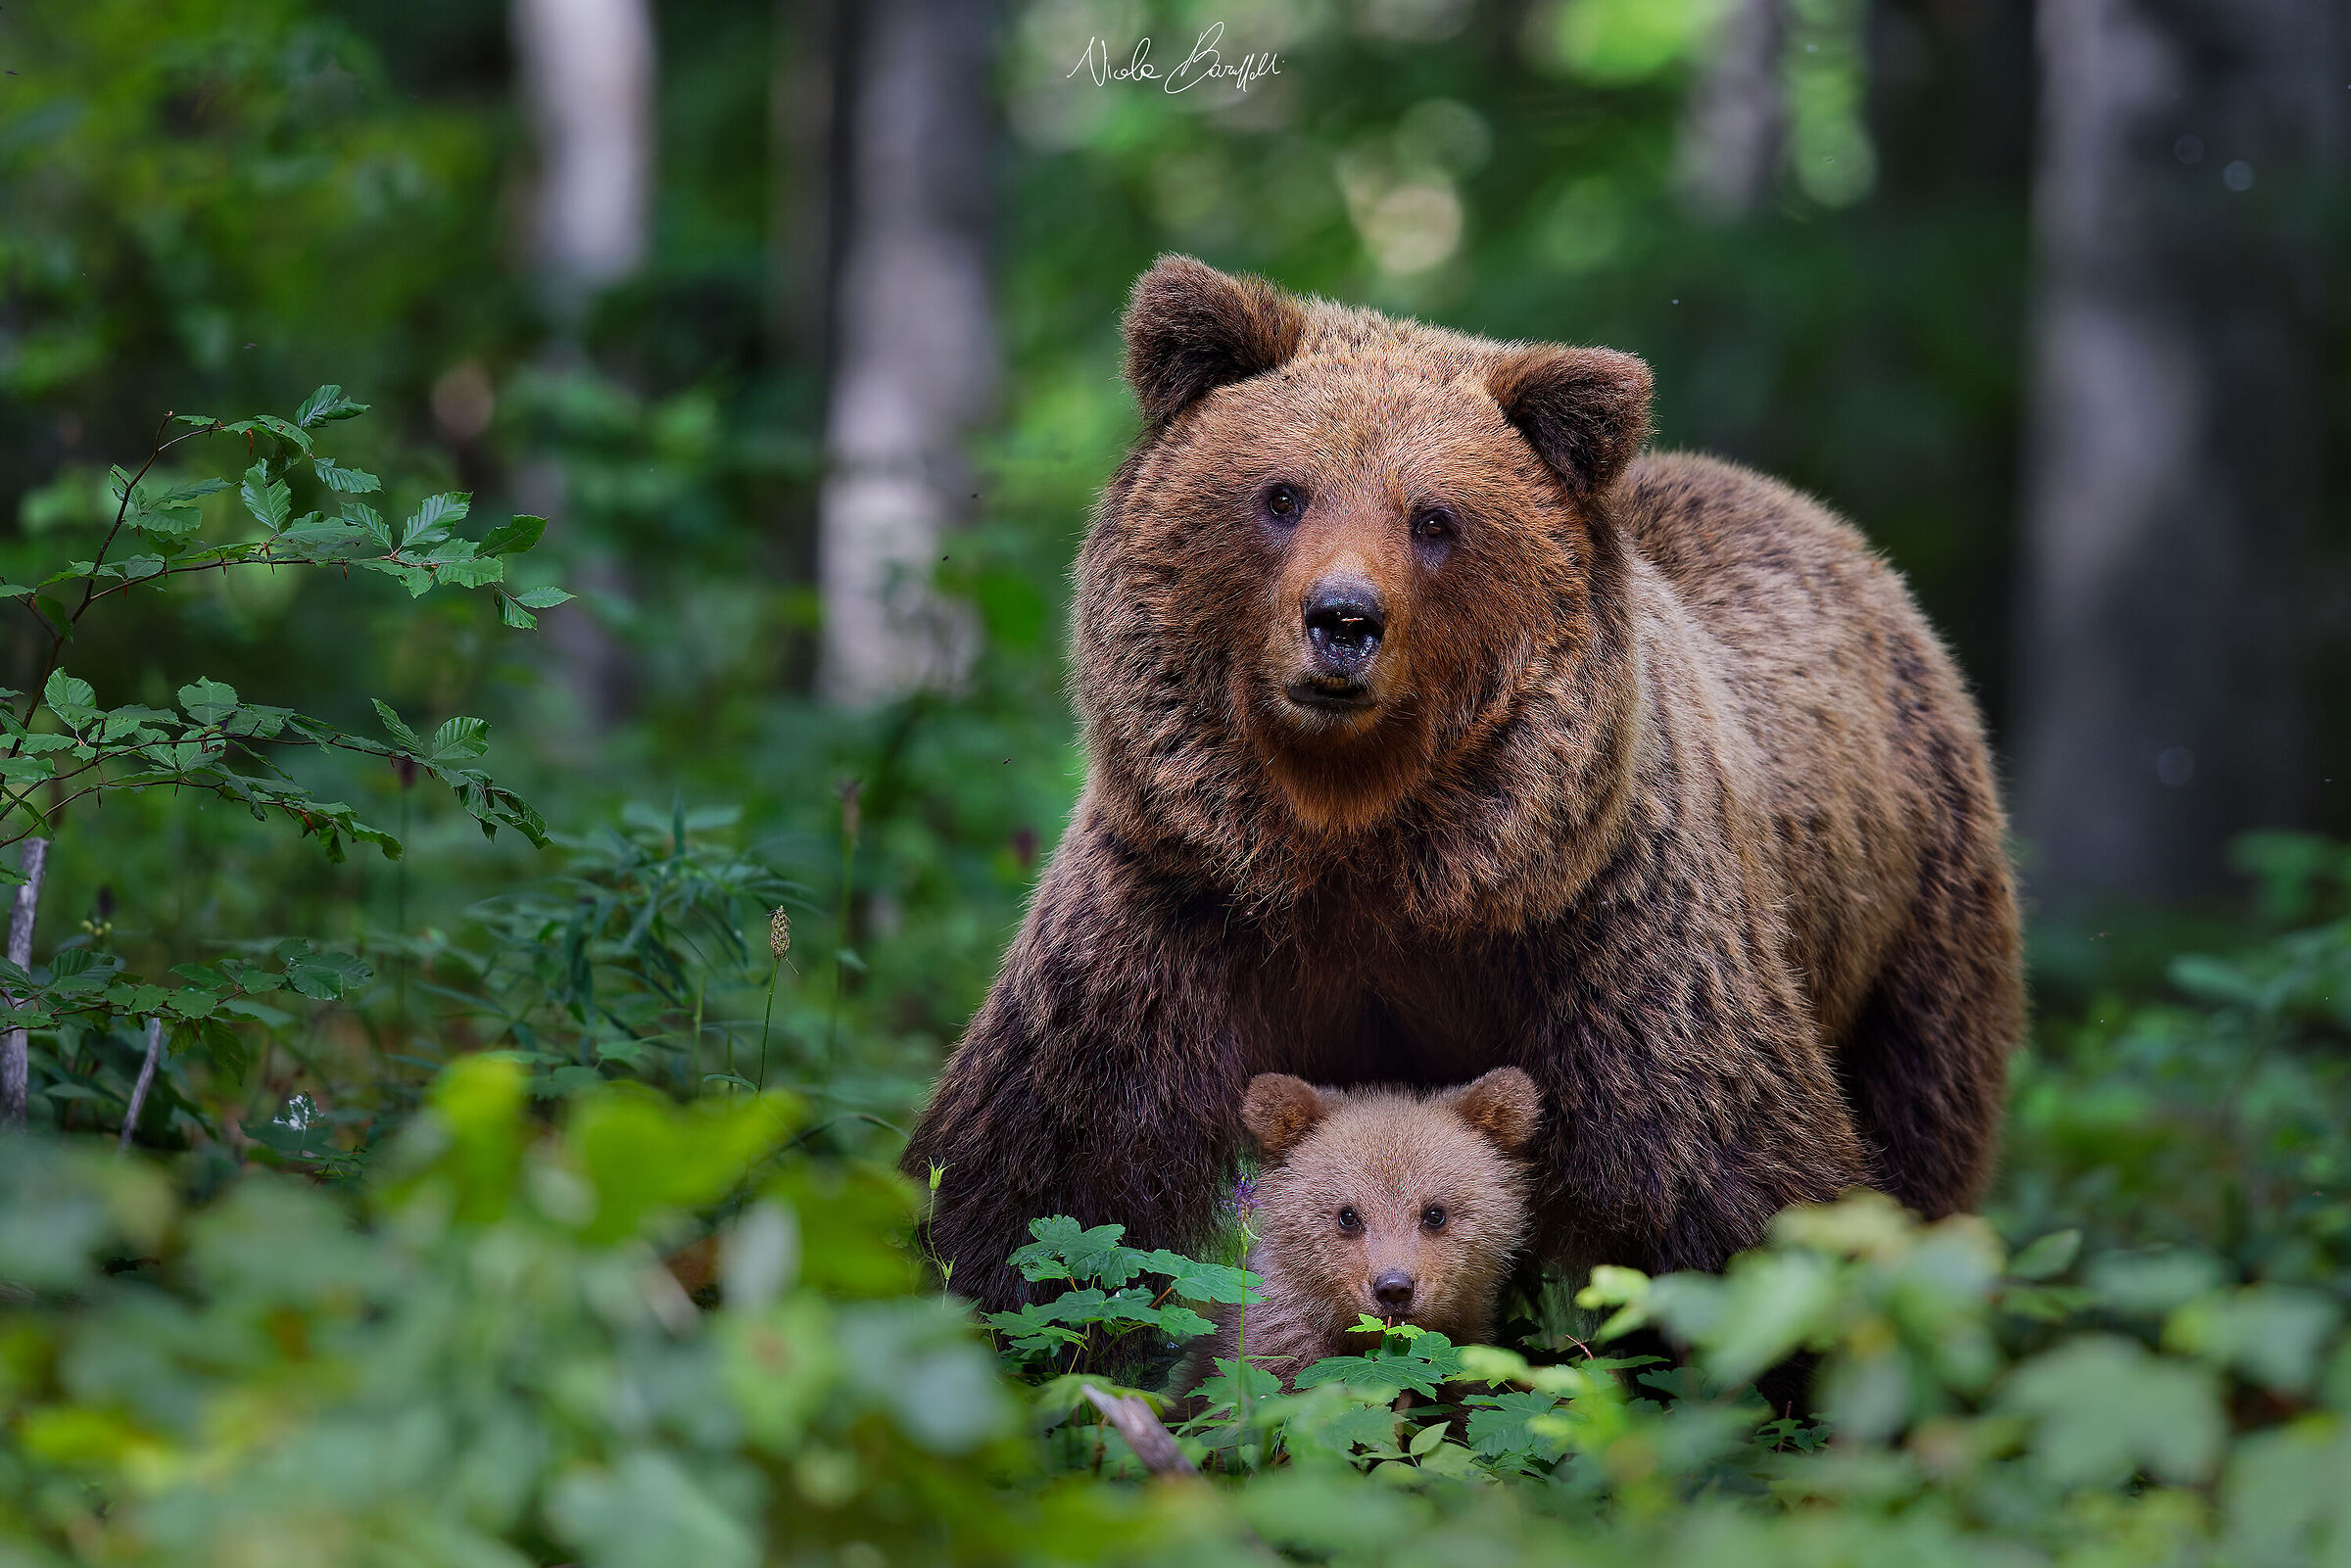 Maternal protection - The bear and mother bear...